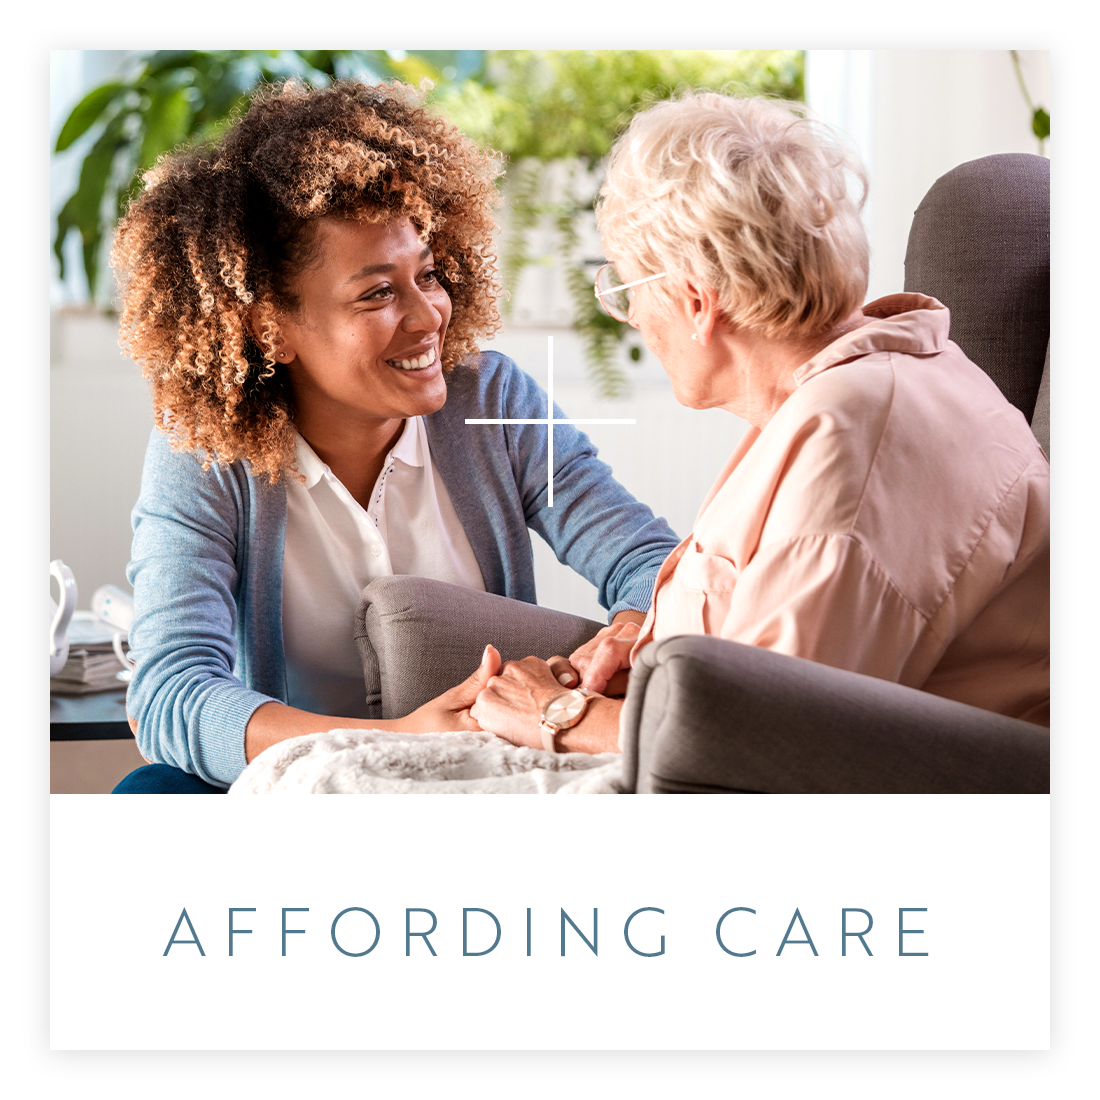 Learn about affording care at Regency Palms Long Beach in Long Beach, California